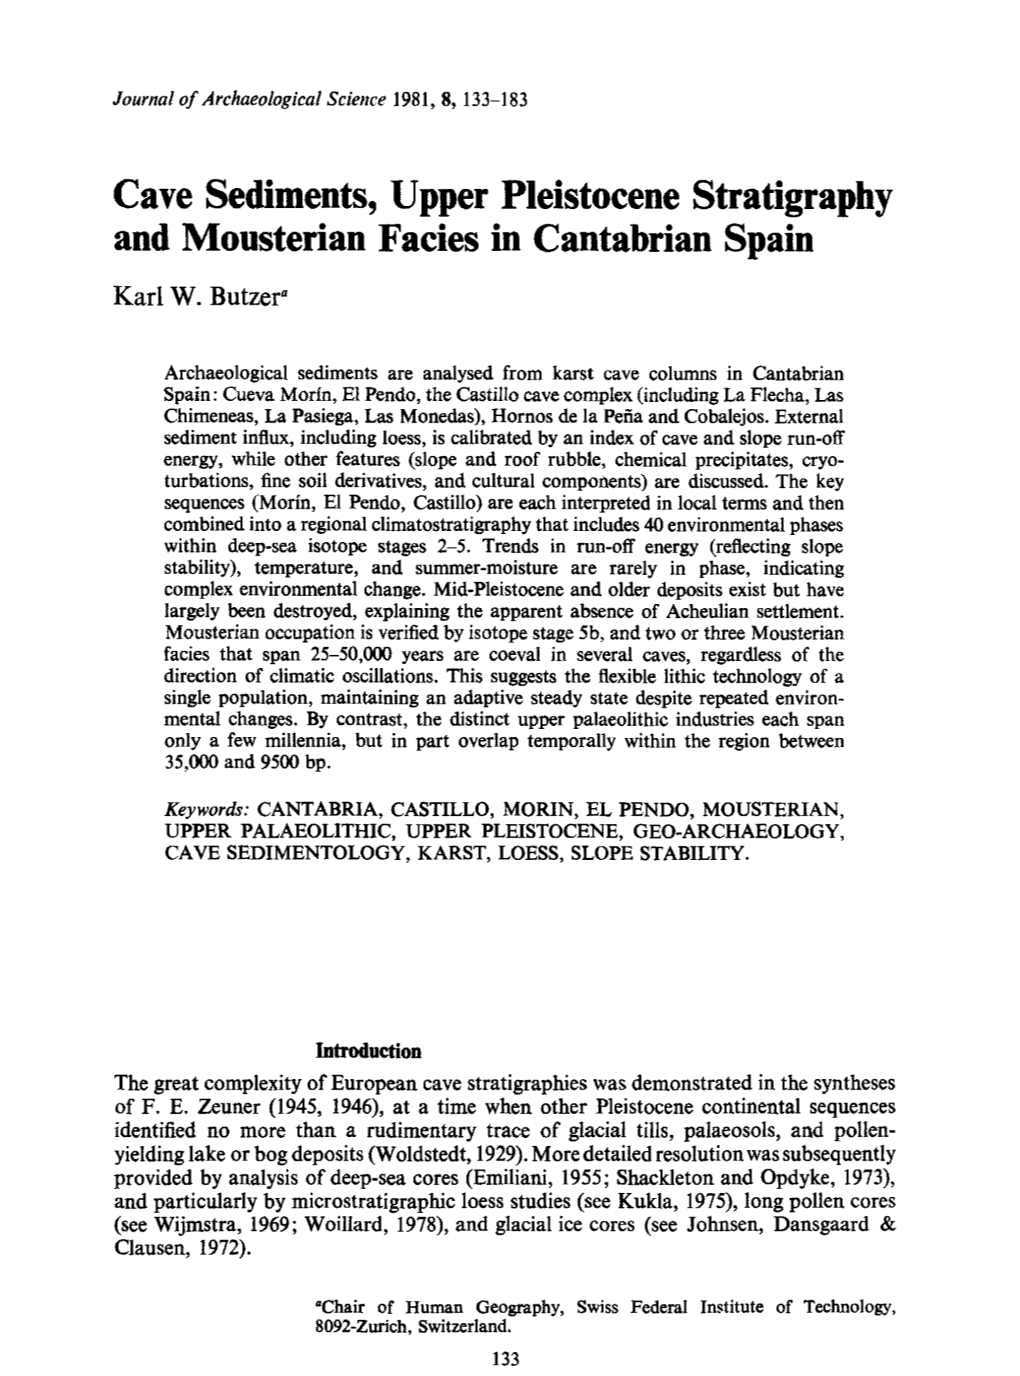 Cave Sediments, Upper Pleistocene Stratigraphy and Mousterian Facies in Cantabrian Spain